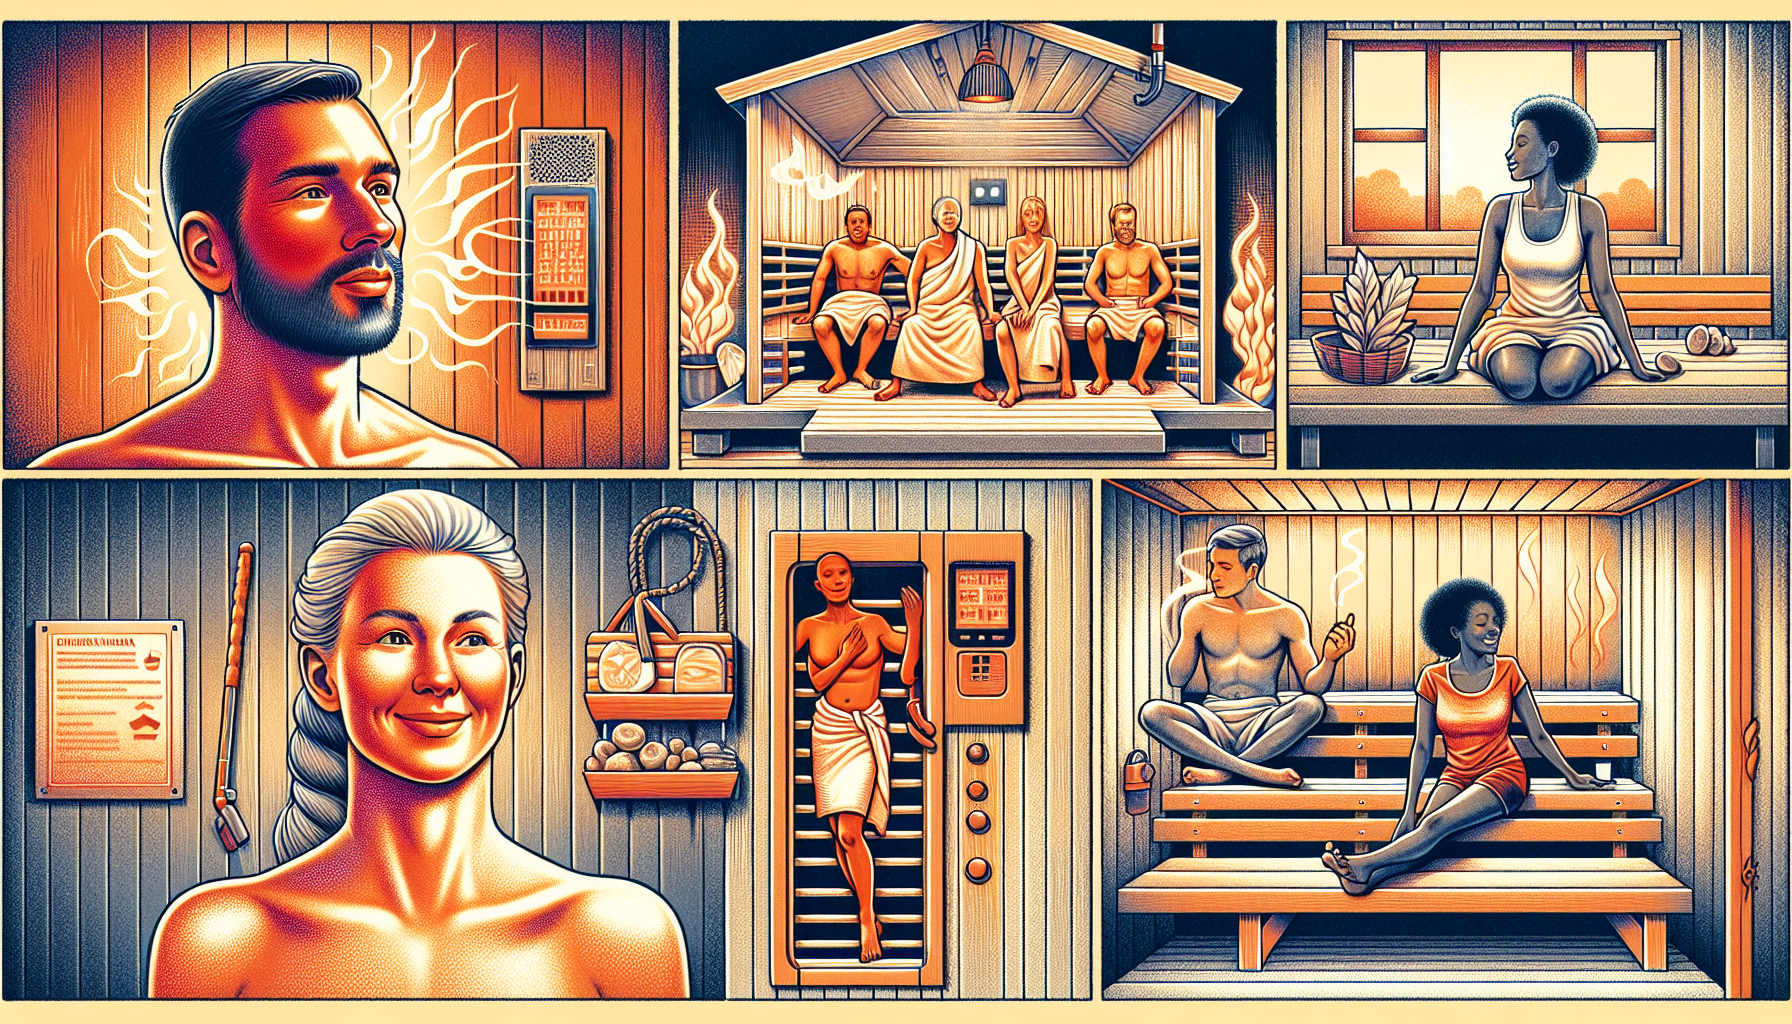 Illustration of sauna users experiencing therapeutic effects